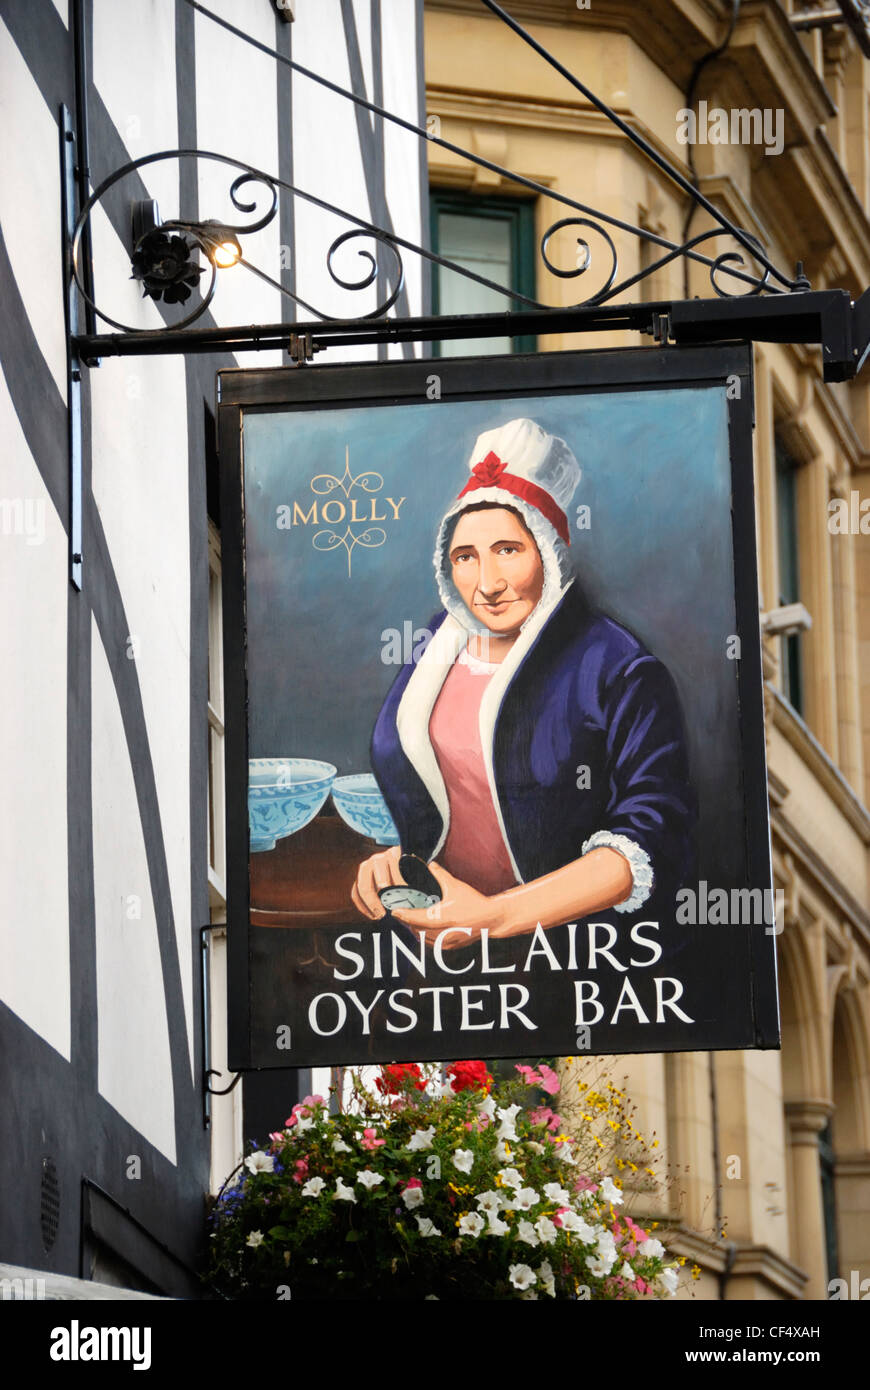 A sign for Sinclairs Oyster Bar in Cathedral Gates, Manchester. The pub dates back to 1720. Stock Photo